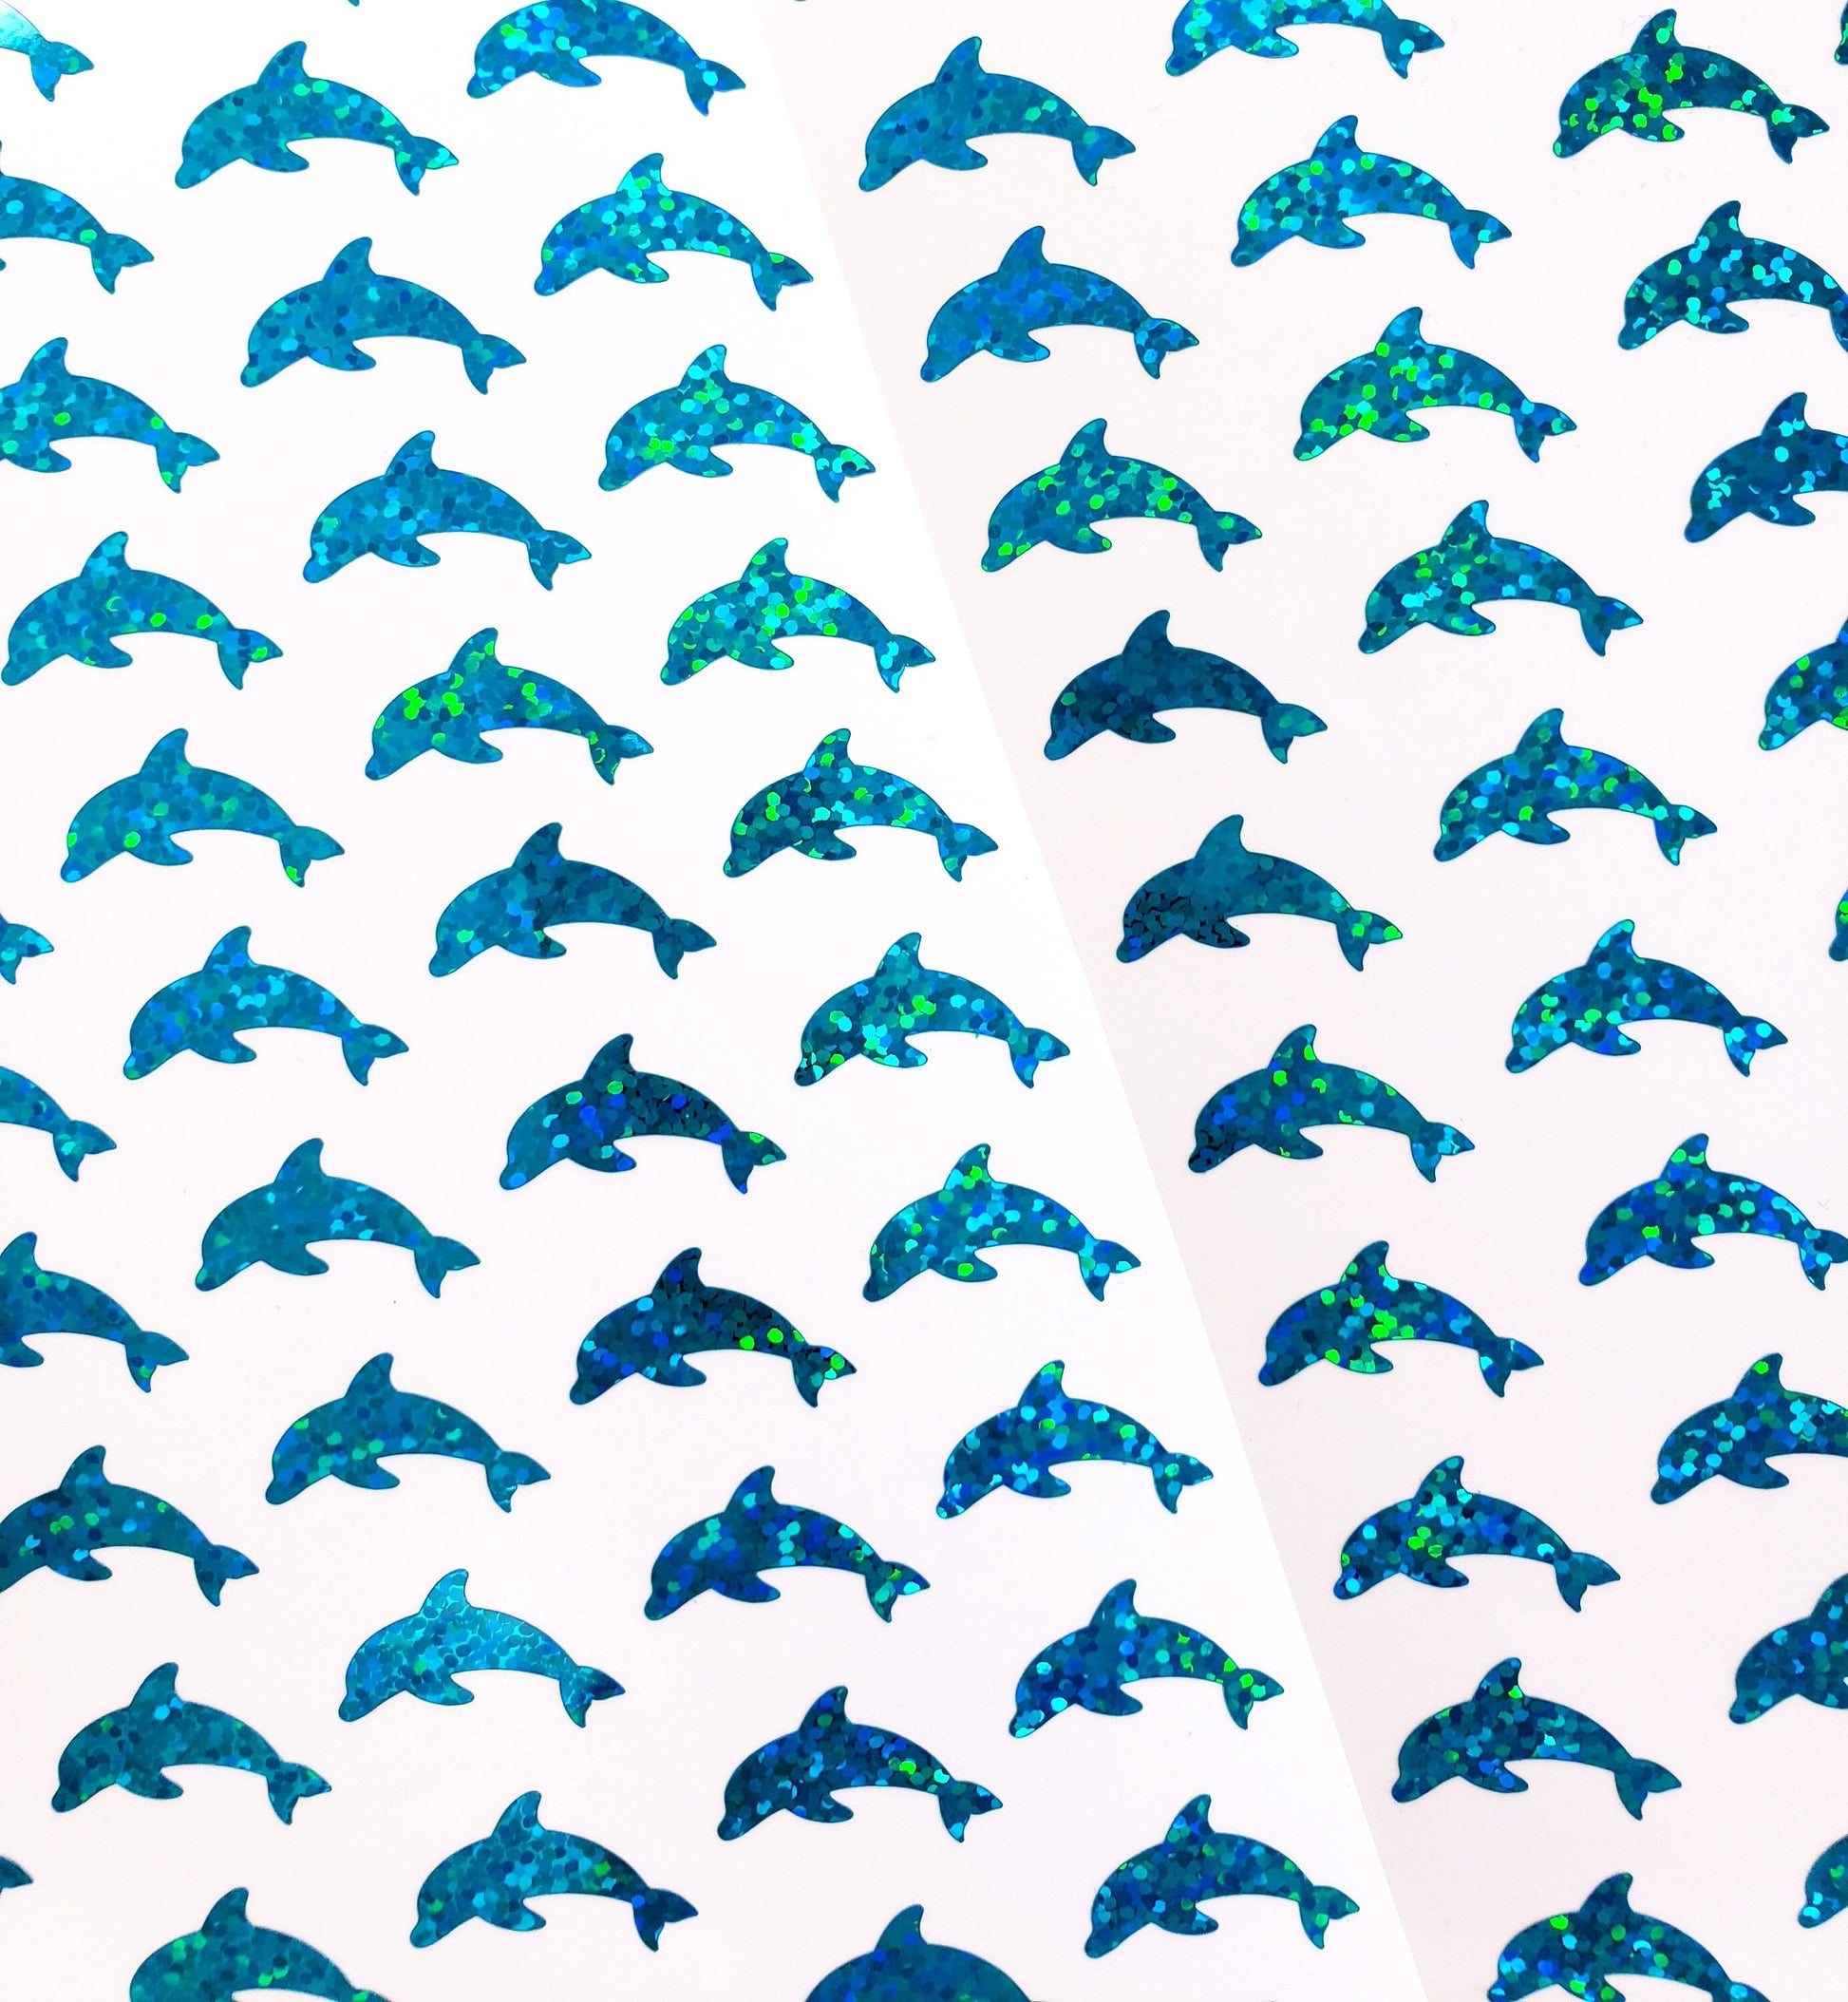 Small dolphin shaped glitter stickers in turquoise vinyl.